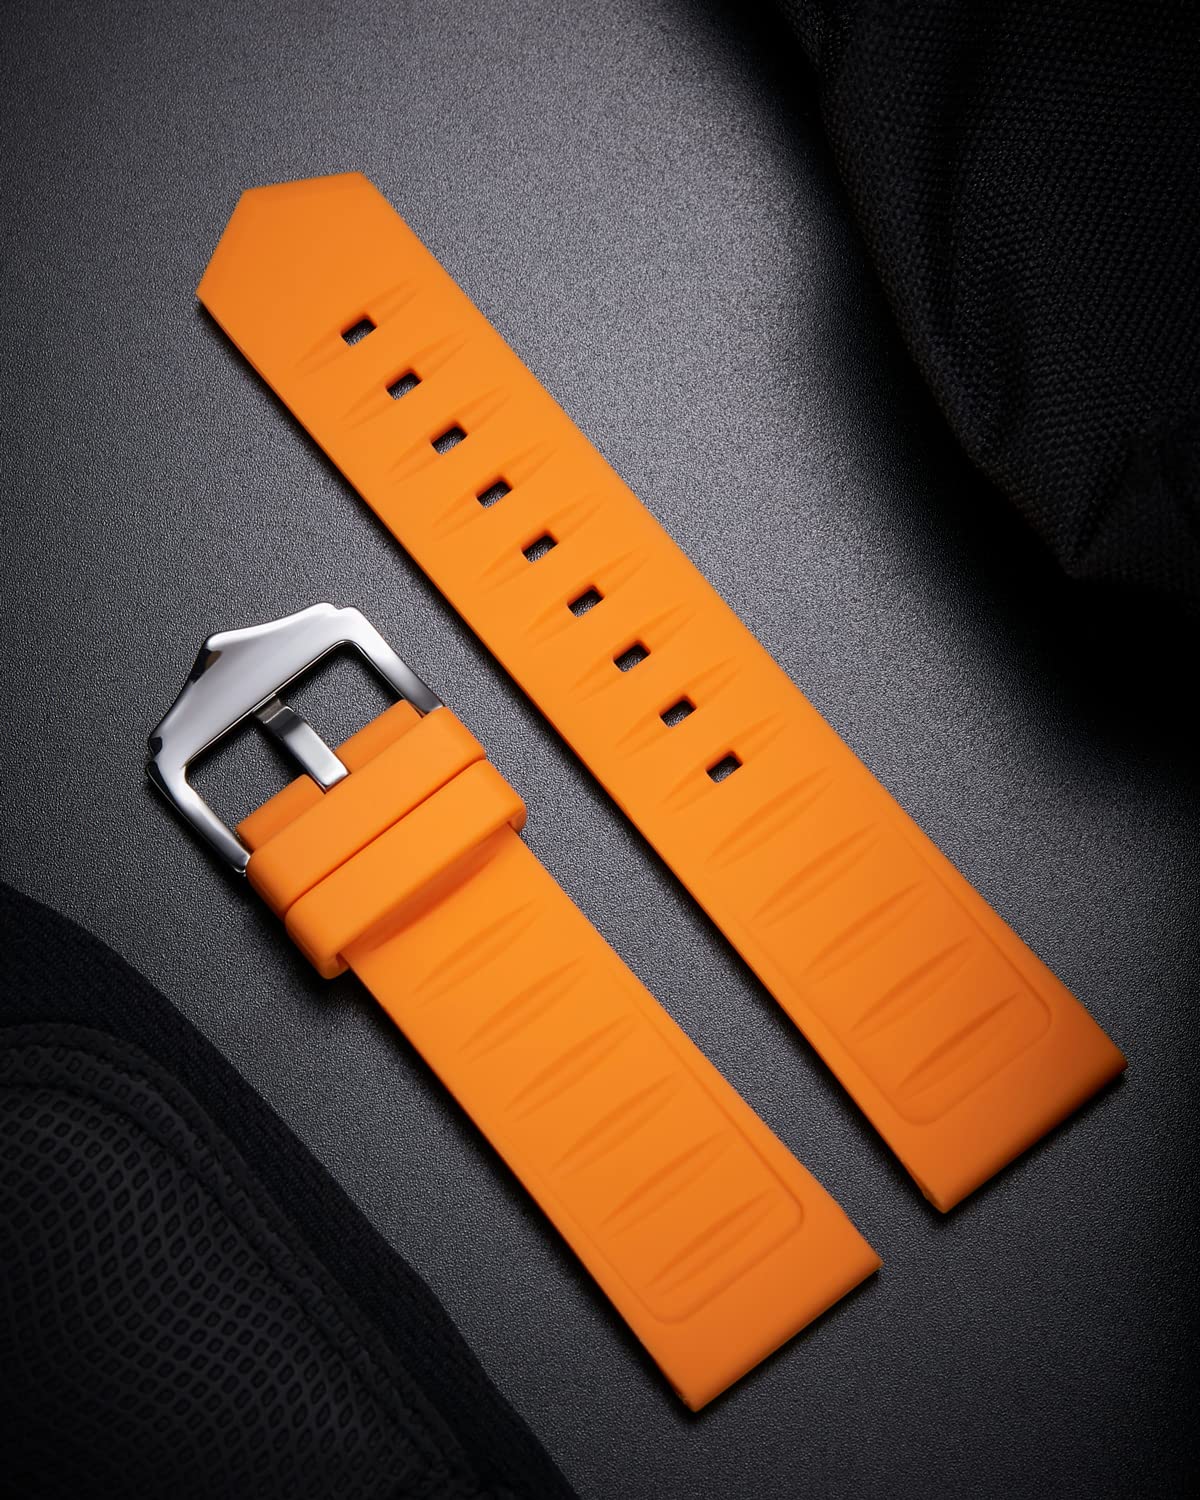 BINLUN Silicone Watch Bands 12mm-28mm Sizes Durable Replacement Rubber Watch Straps for Men Women 7 Color (White/Red/Black/Blue/Orange/Grey/Green)